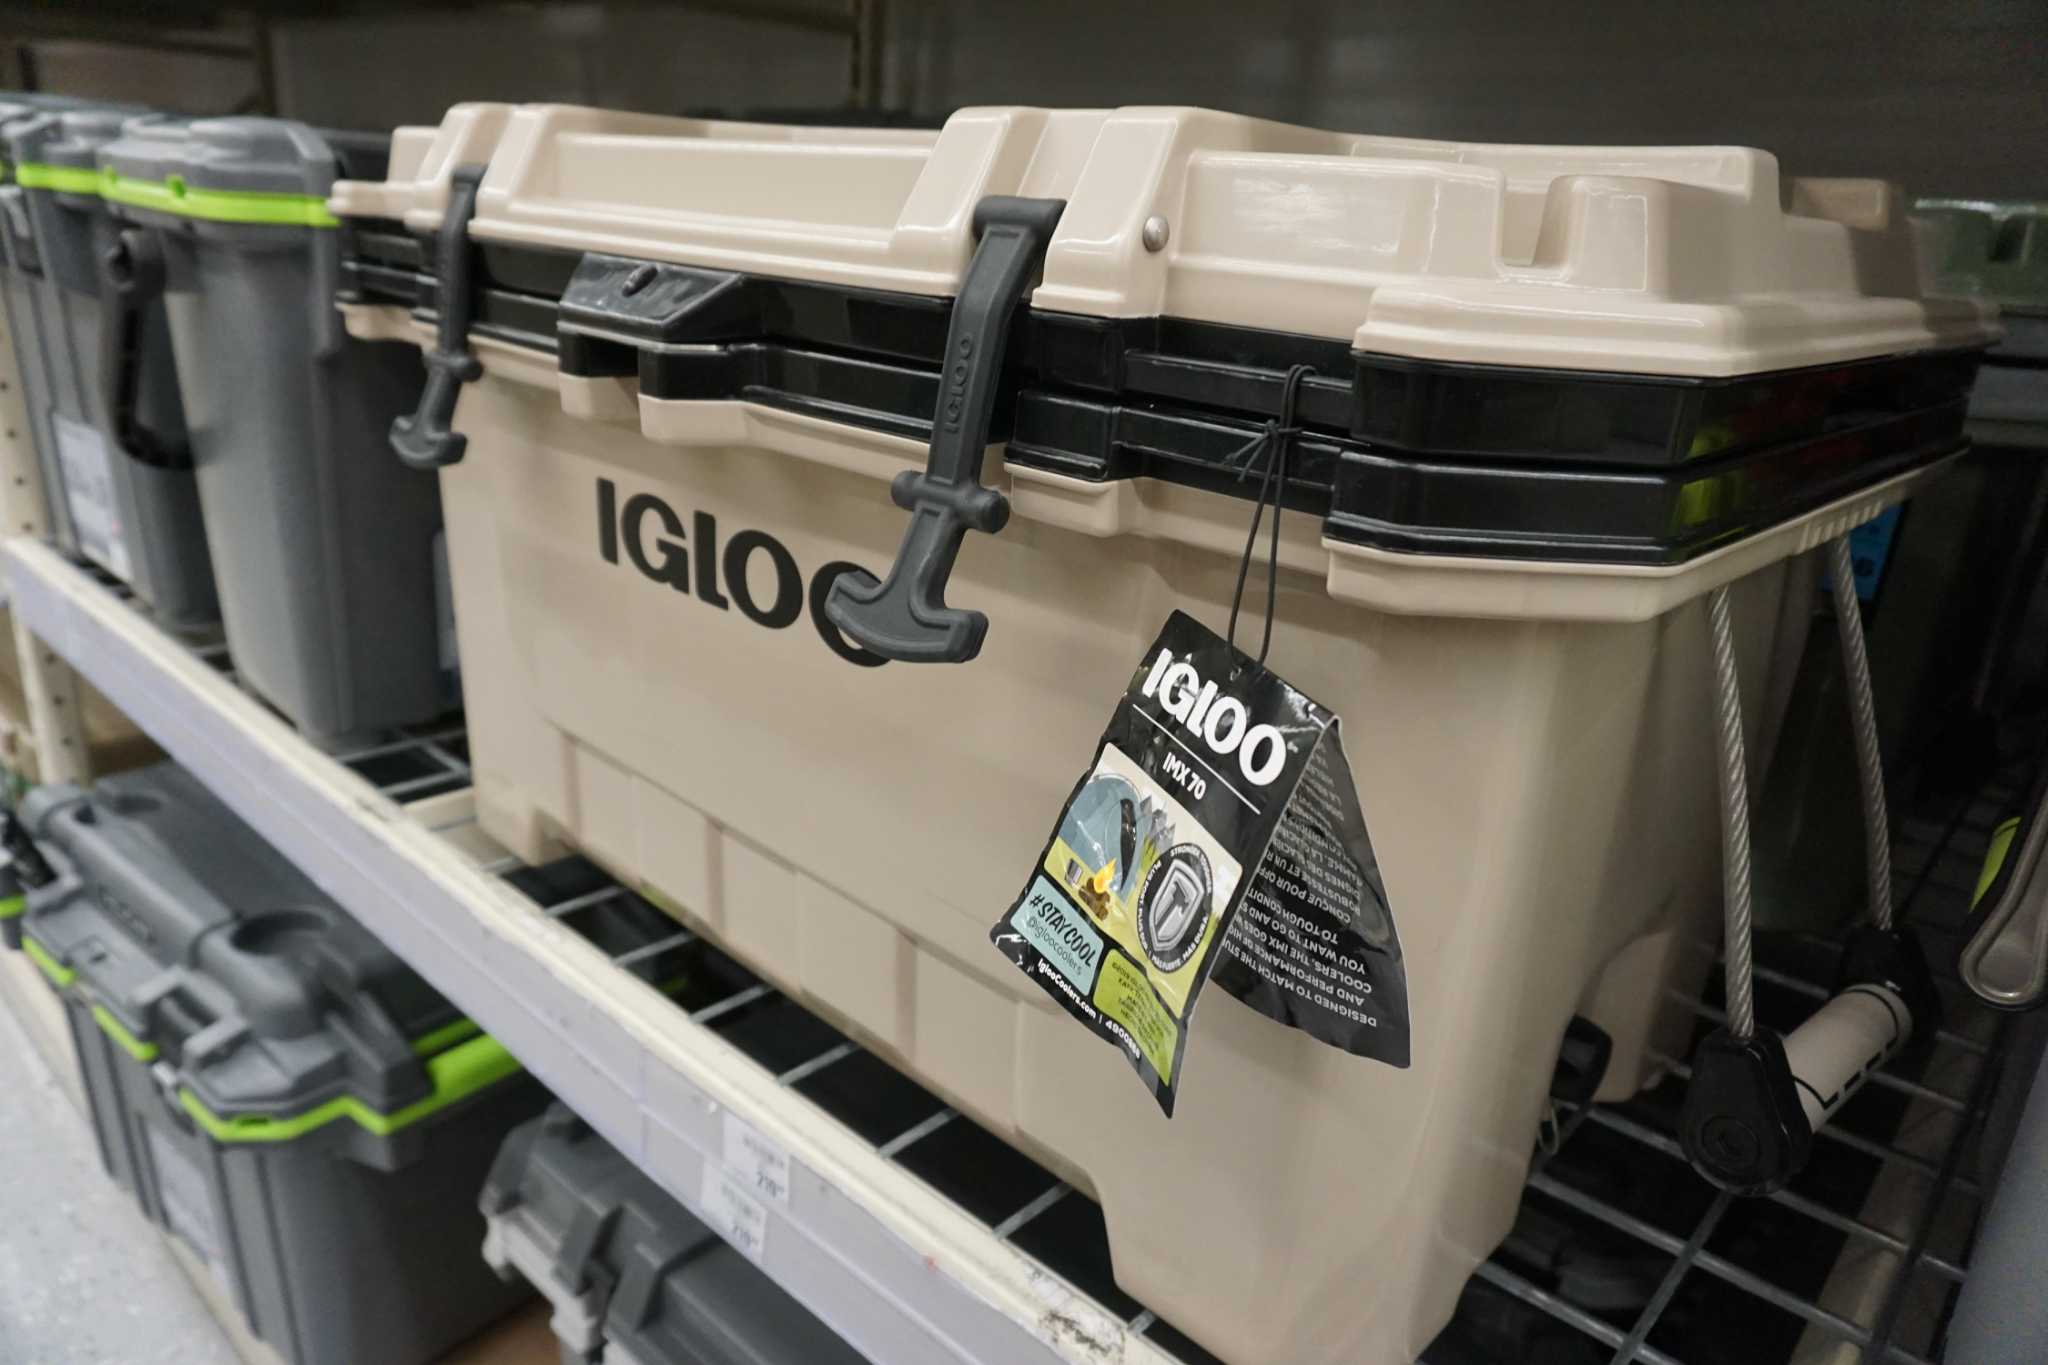 Igloo Improves Quality Control, Cuts Costs with Digital Transformation